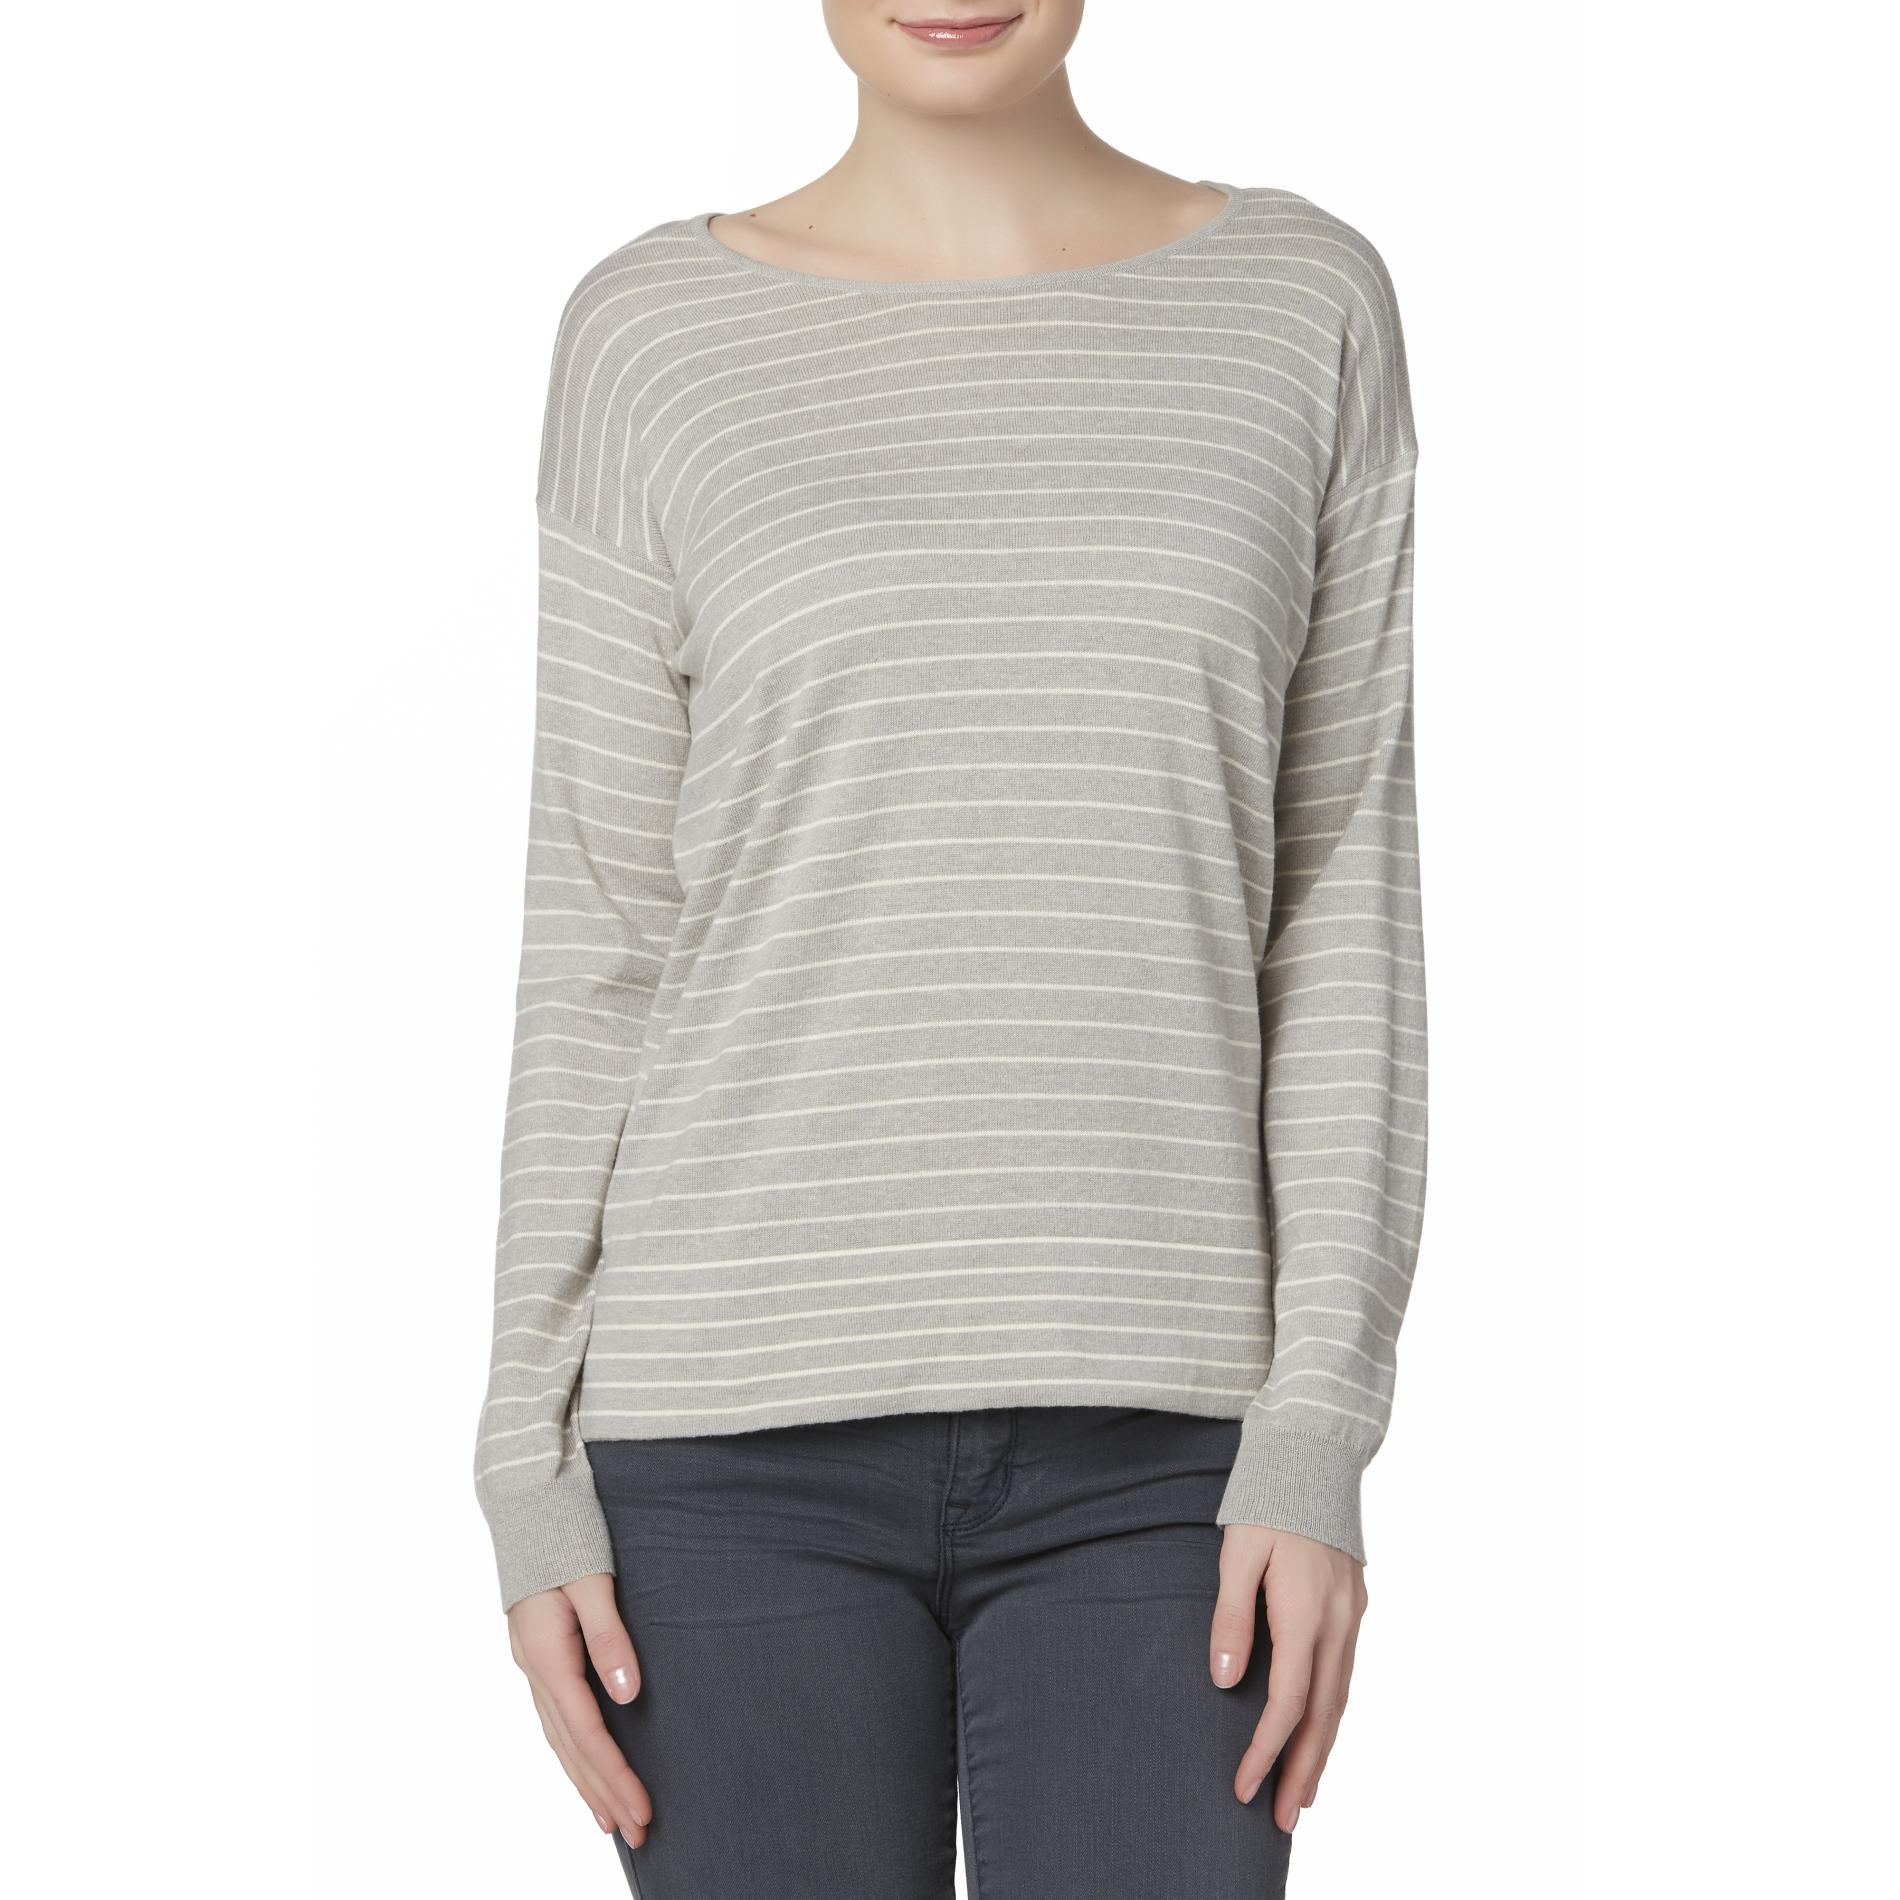 Simply Styled Women's Crew Neck Sweater - Striped